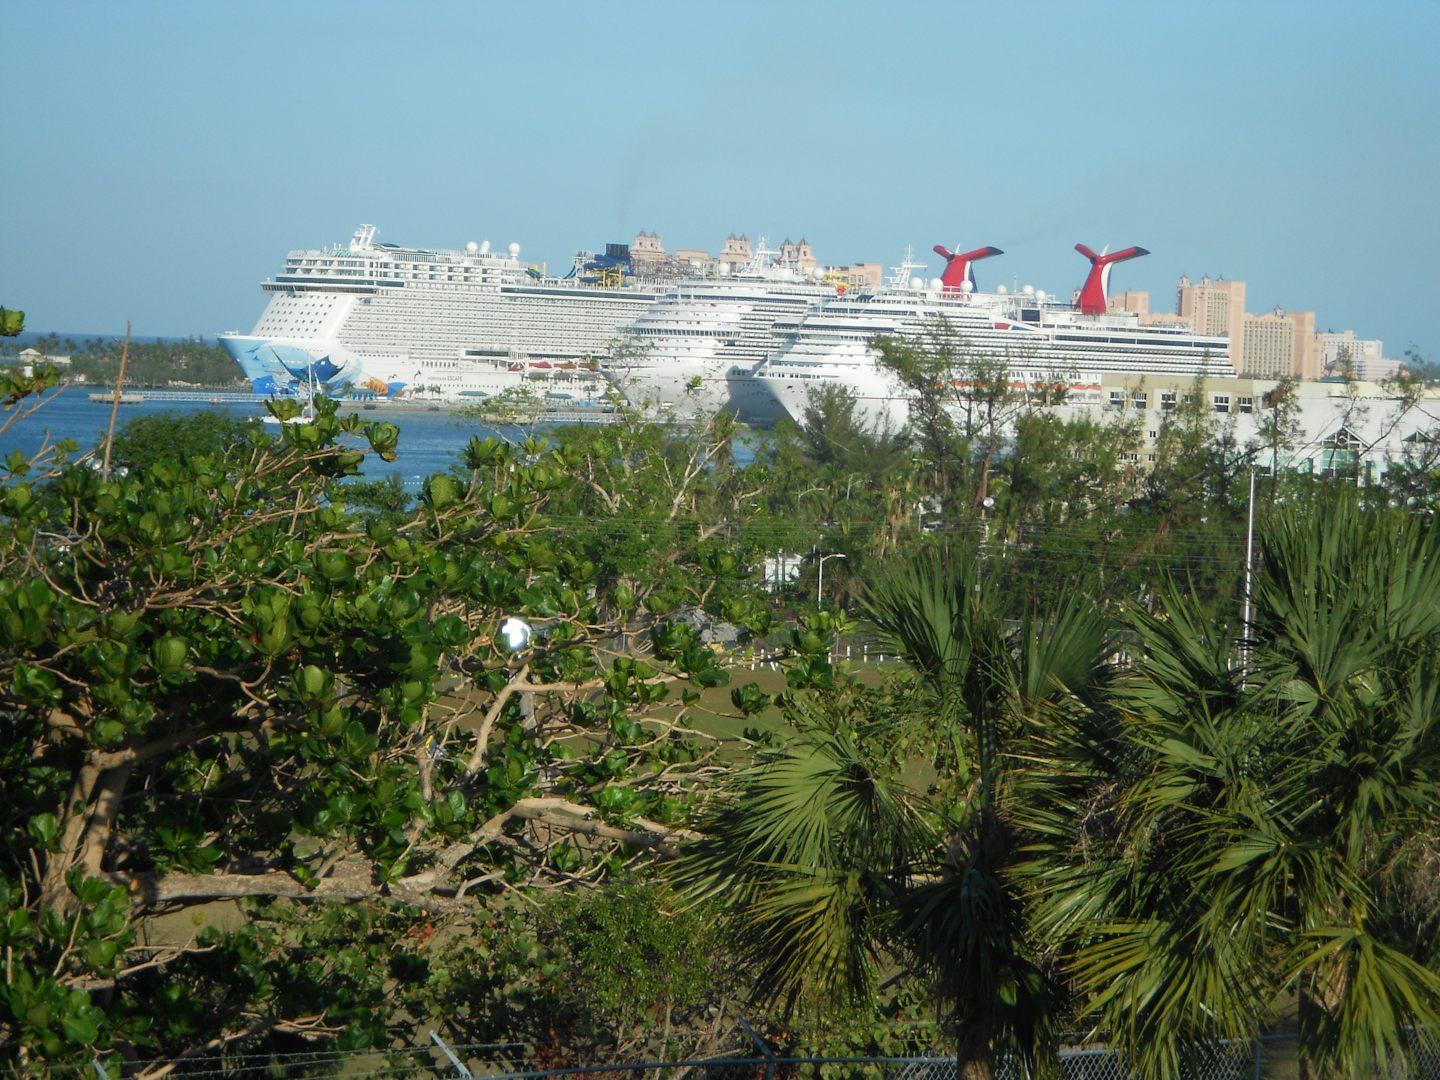 The ships tied up in Nassau.